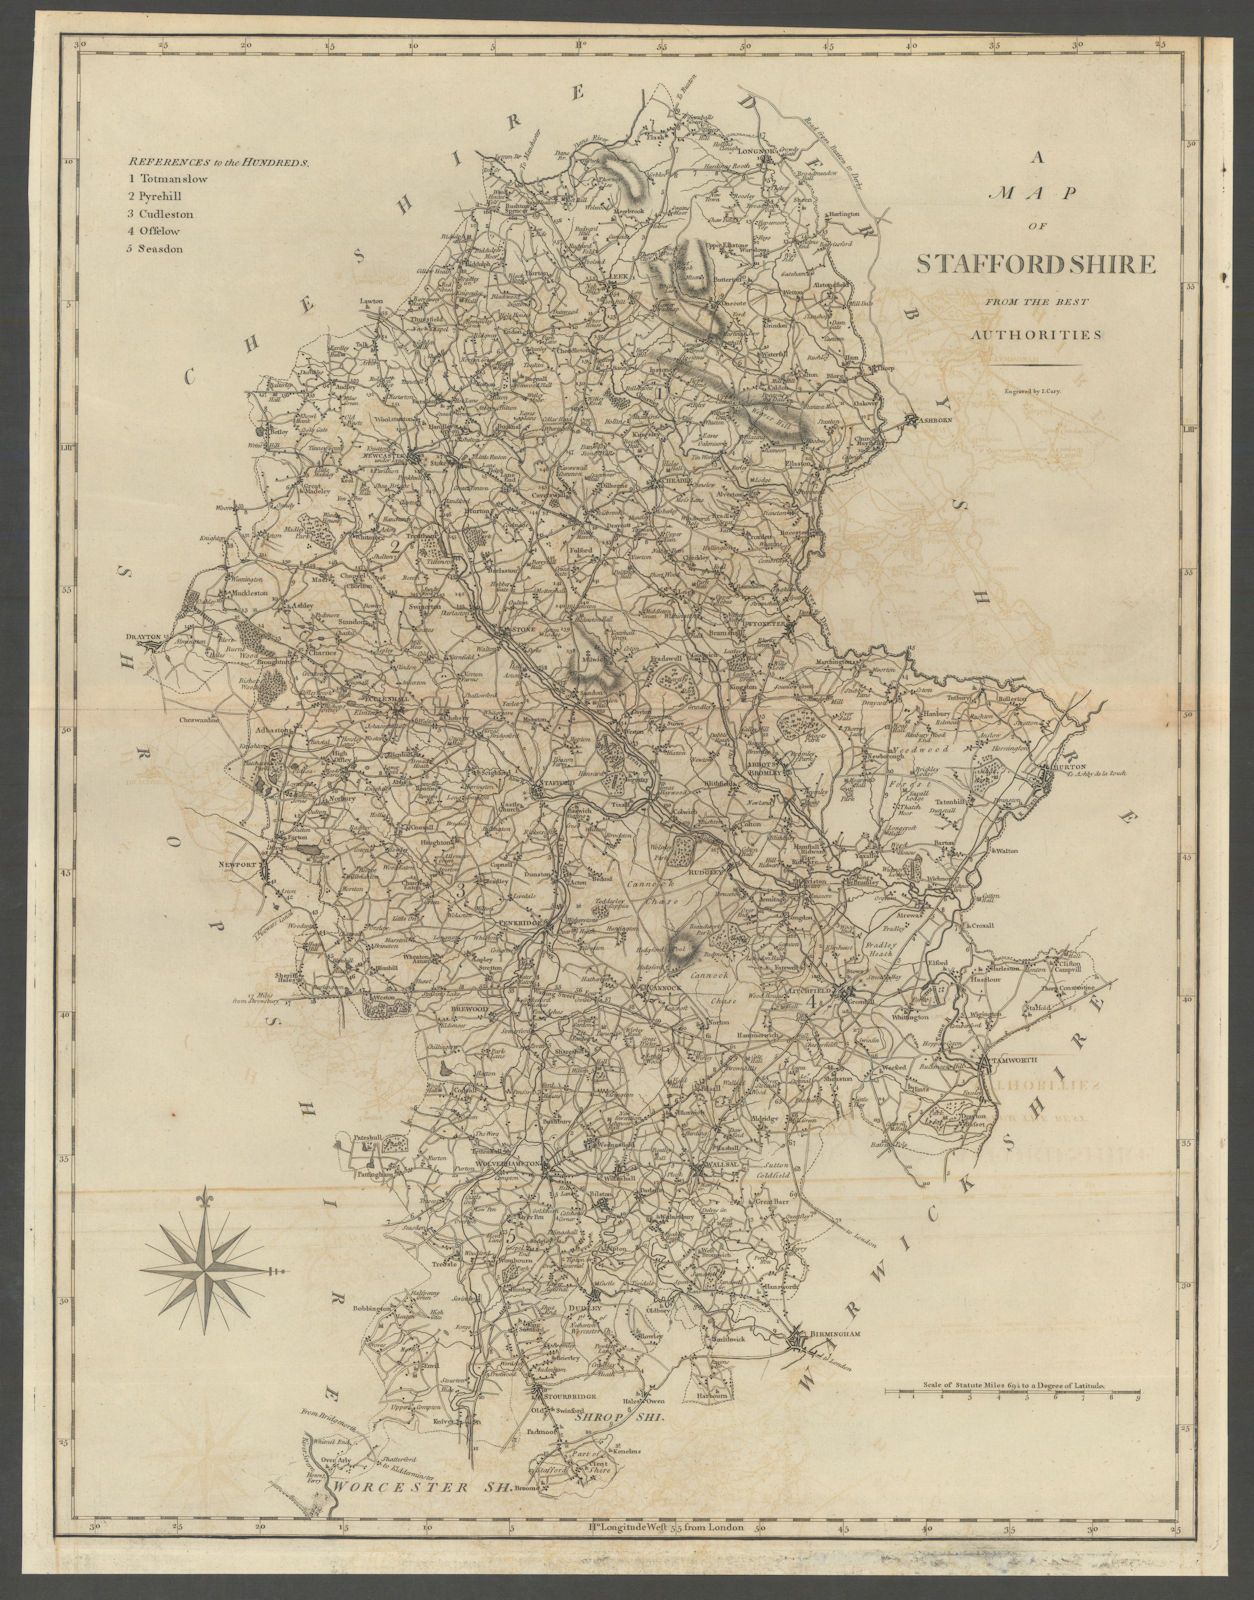 "A map of Staffordshire from the best authorities". County map. CARY 1789